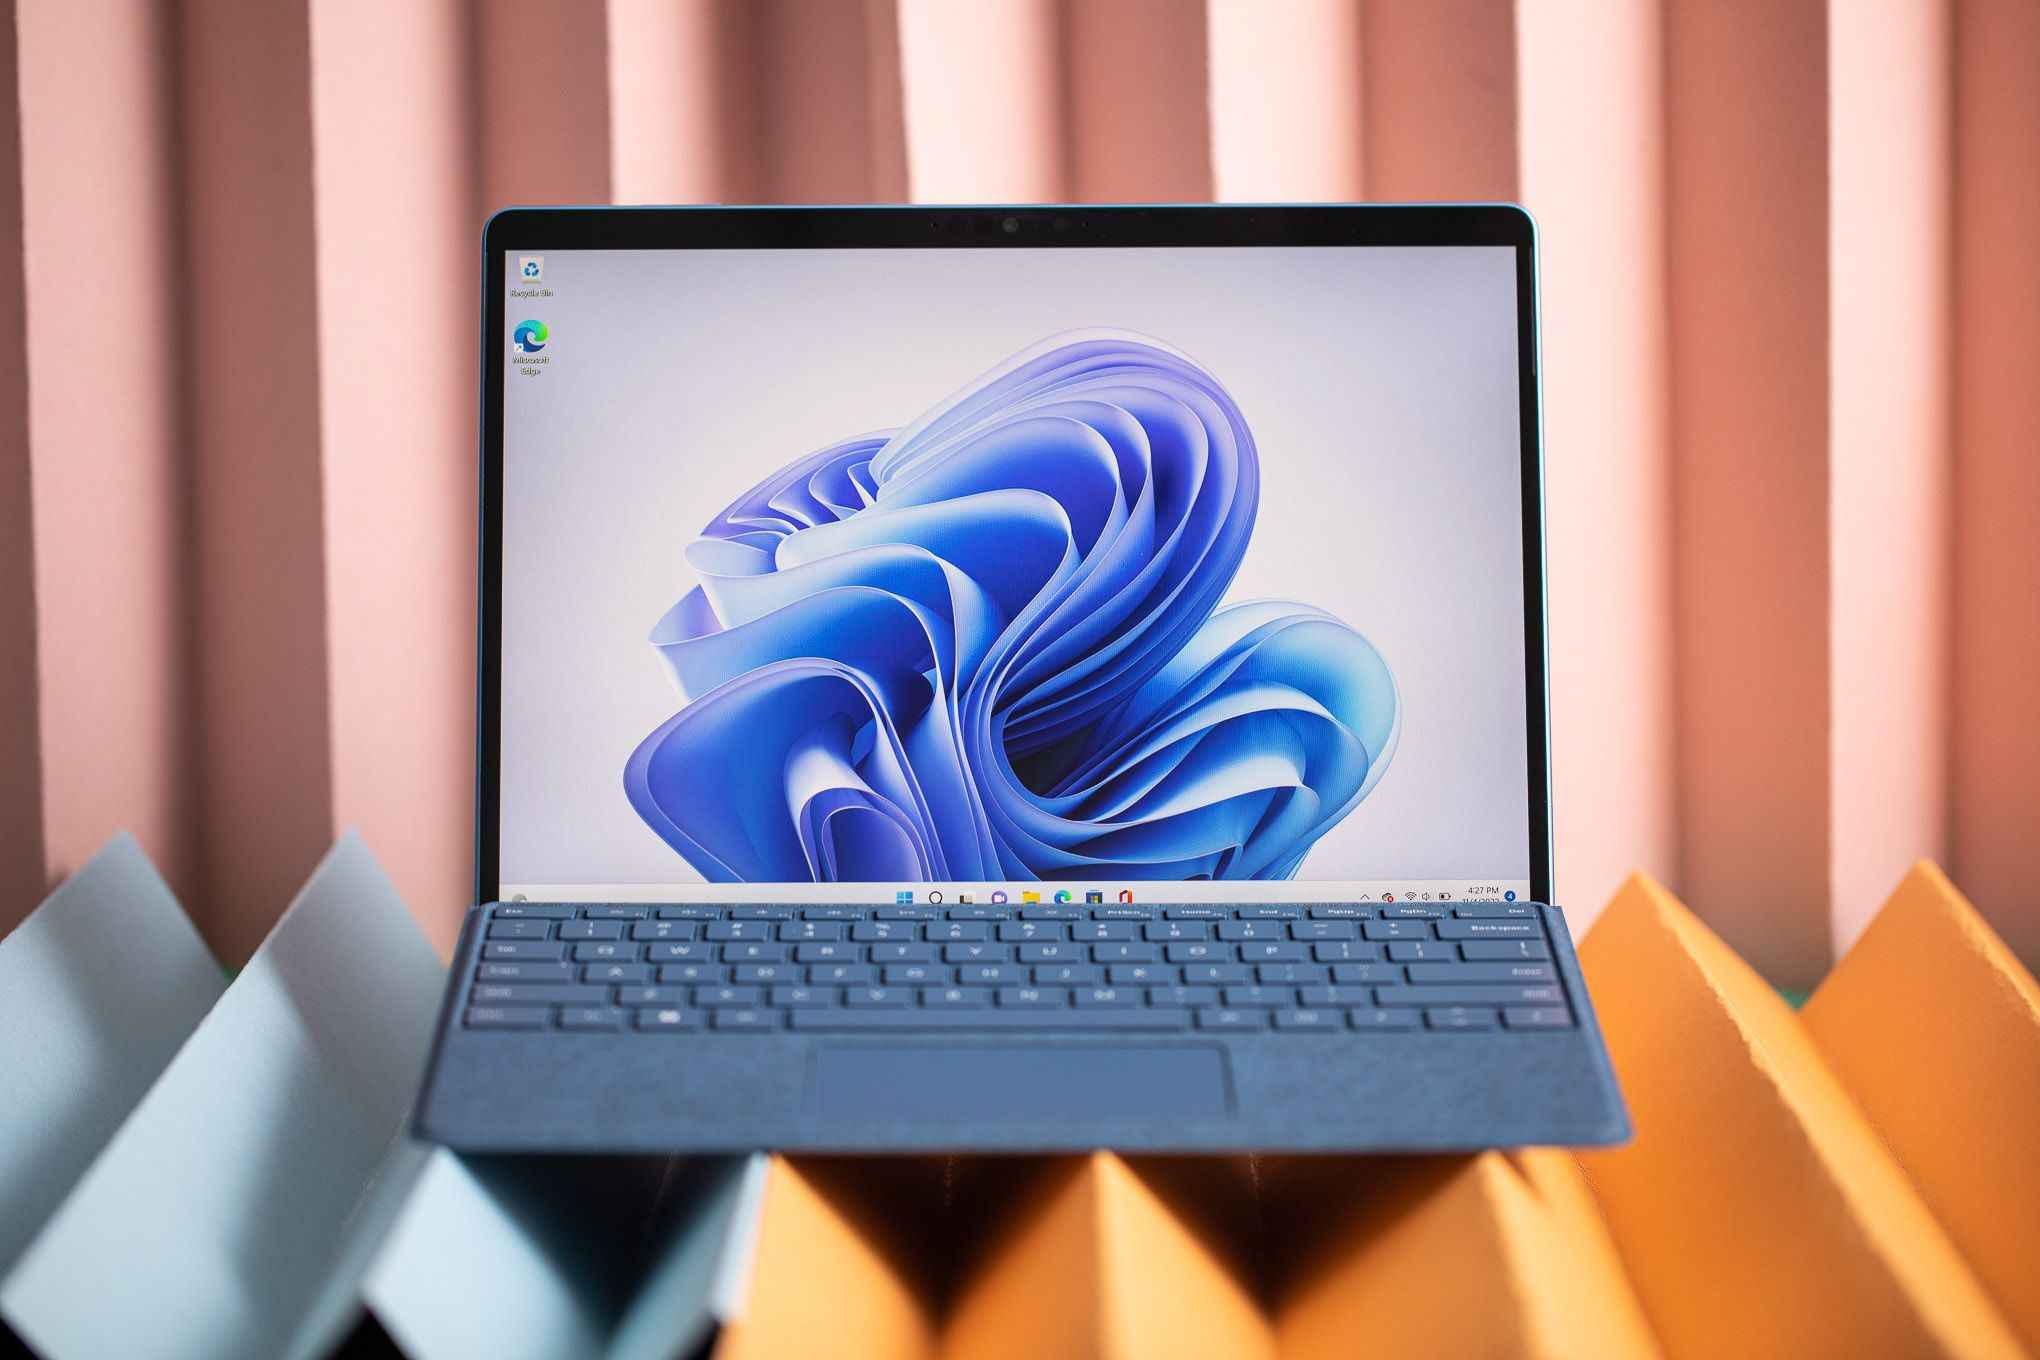 Microsoft is expected to release its first real "AI PCs" with its upcoming Surface laptops.